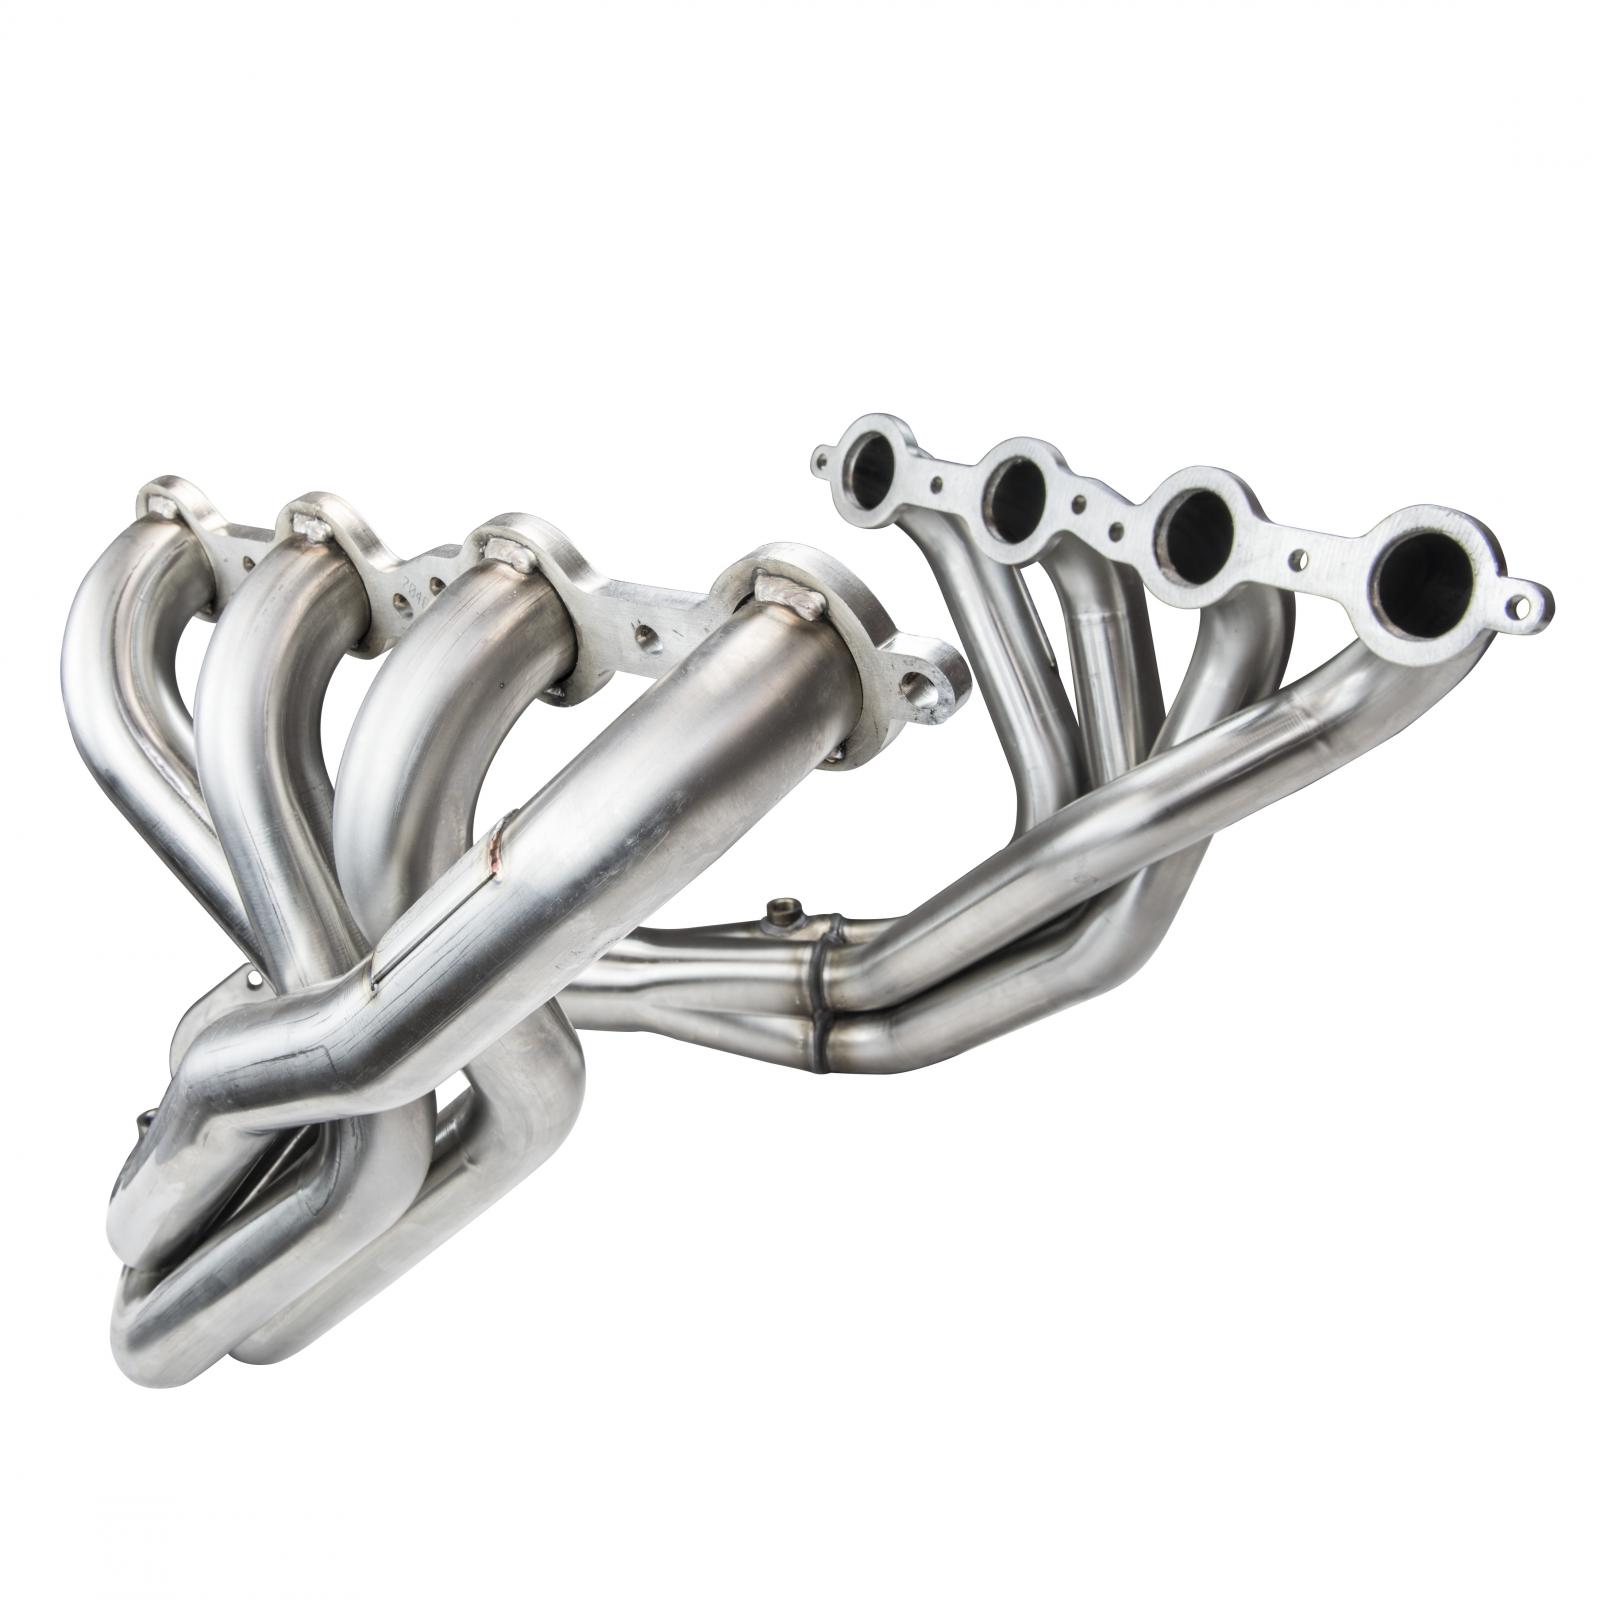 Stainless Steel Headers 1.75 x 3" Long Tube 05-13 Corvette C6 LS2/LS3 6.0L/6.2L w/02 Extension Harness Kit-2 Front/2 Rear 02 Fit